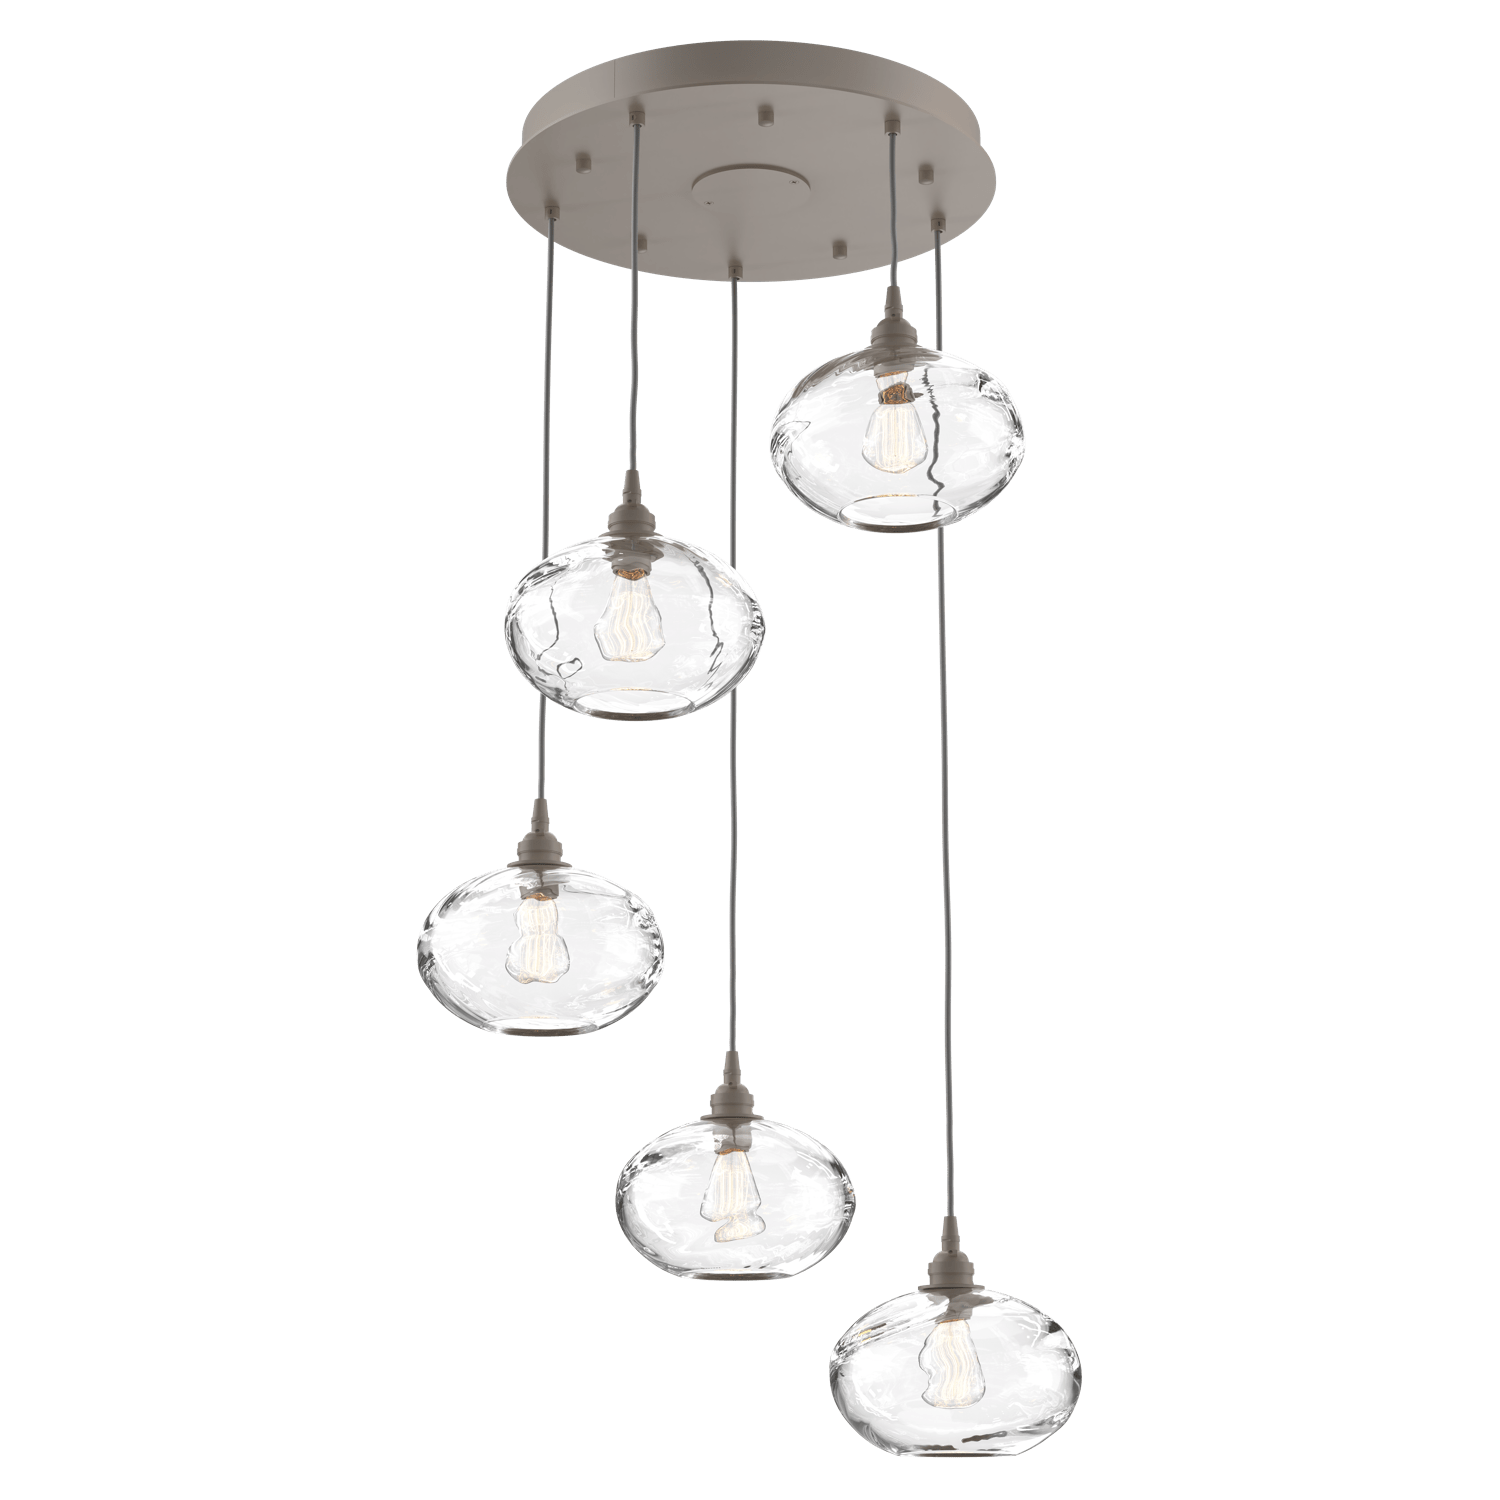 CHB0036-05-BS-OC-Hammerton-Studio-Optic-Blown-Glass-Coppa-5-light-round-pendant-chandelier-with-metallic-beige-silver-finish-and-optic-clear-blown-glass-shades-and-incandescent-lamping